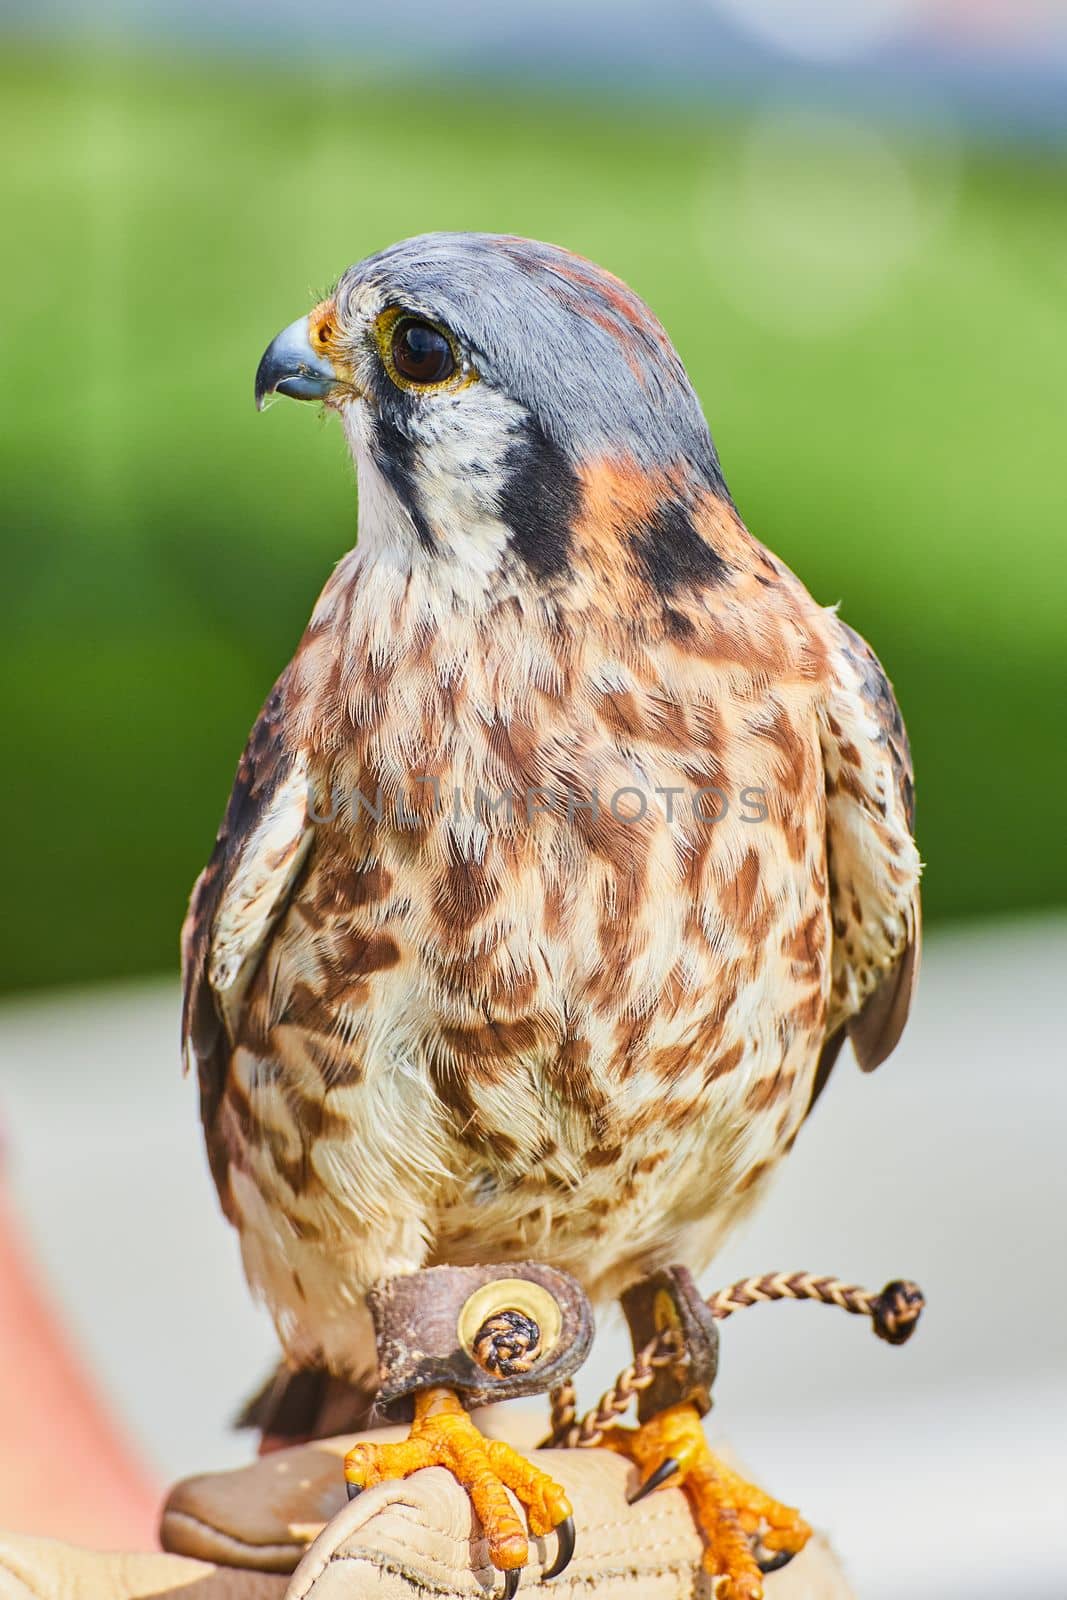 Tamed American Kestrel raptor on leather glove of trainer by njproductions